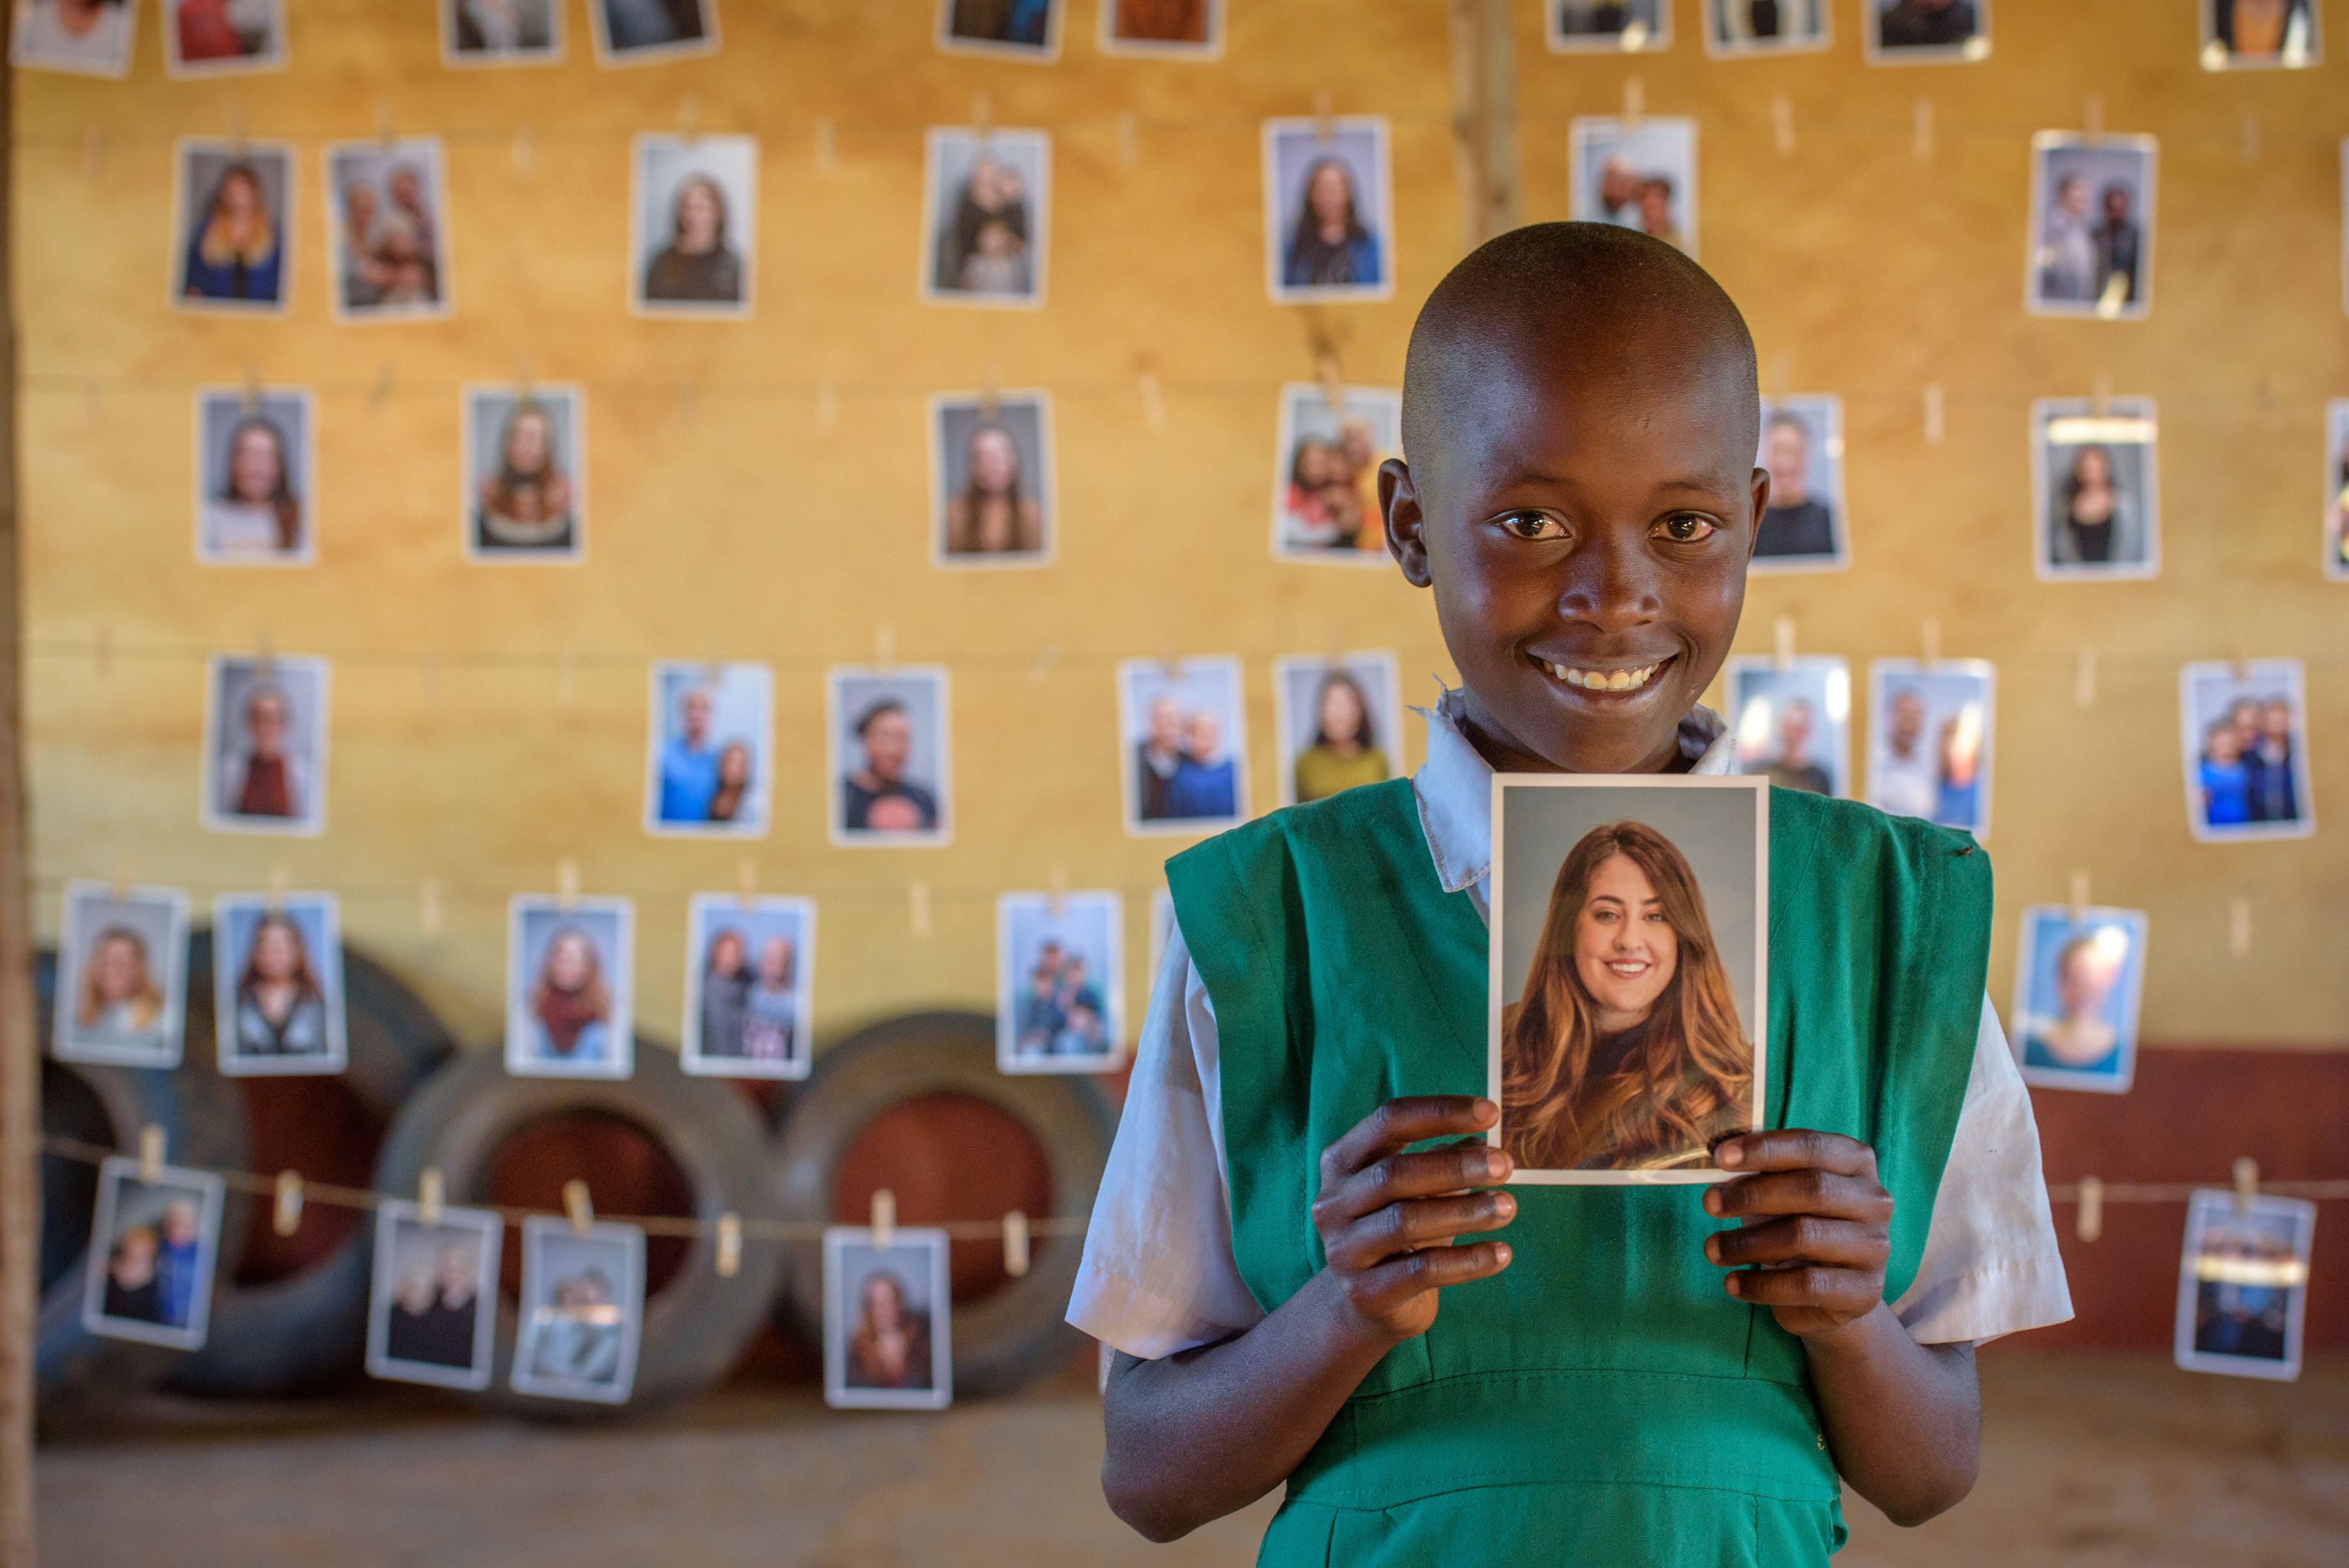 Anna from Kenya smiles and holds up a photo of the sponsor she has chosen. There are rows of photos of other sponsors in the background behind her